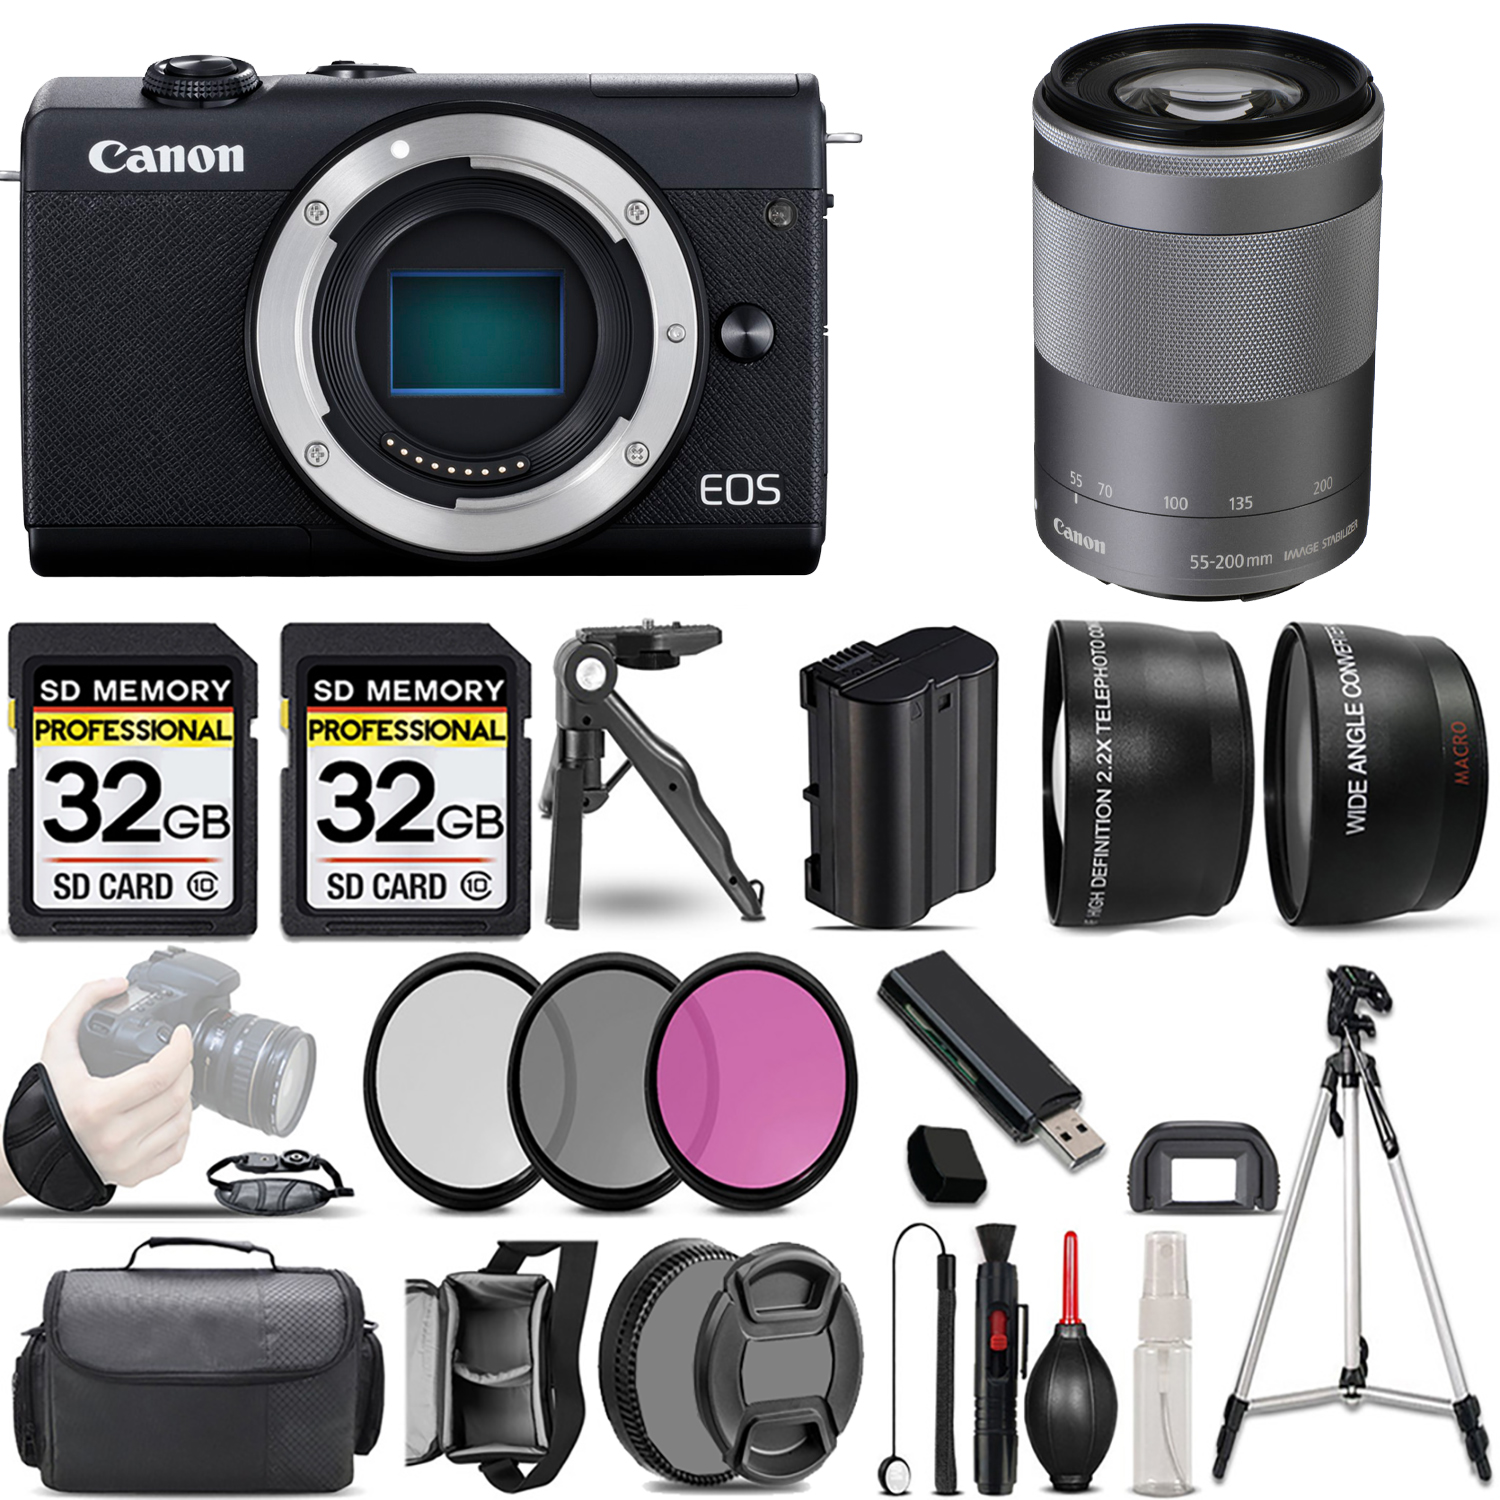 EOS M200 Camera (Black) + 55-200mm IS STM Lens (Silver) + 3 Piece Filter Set + 64GB *FREE SHIPPING*